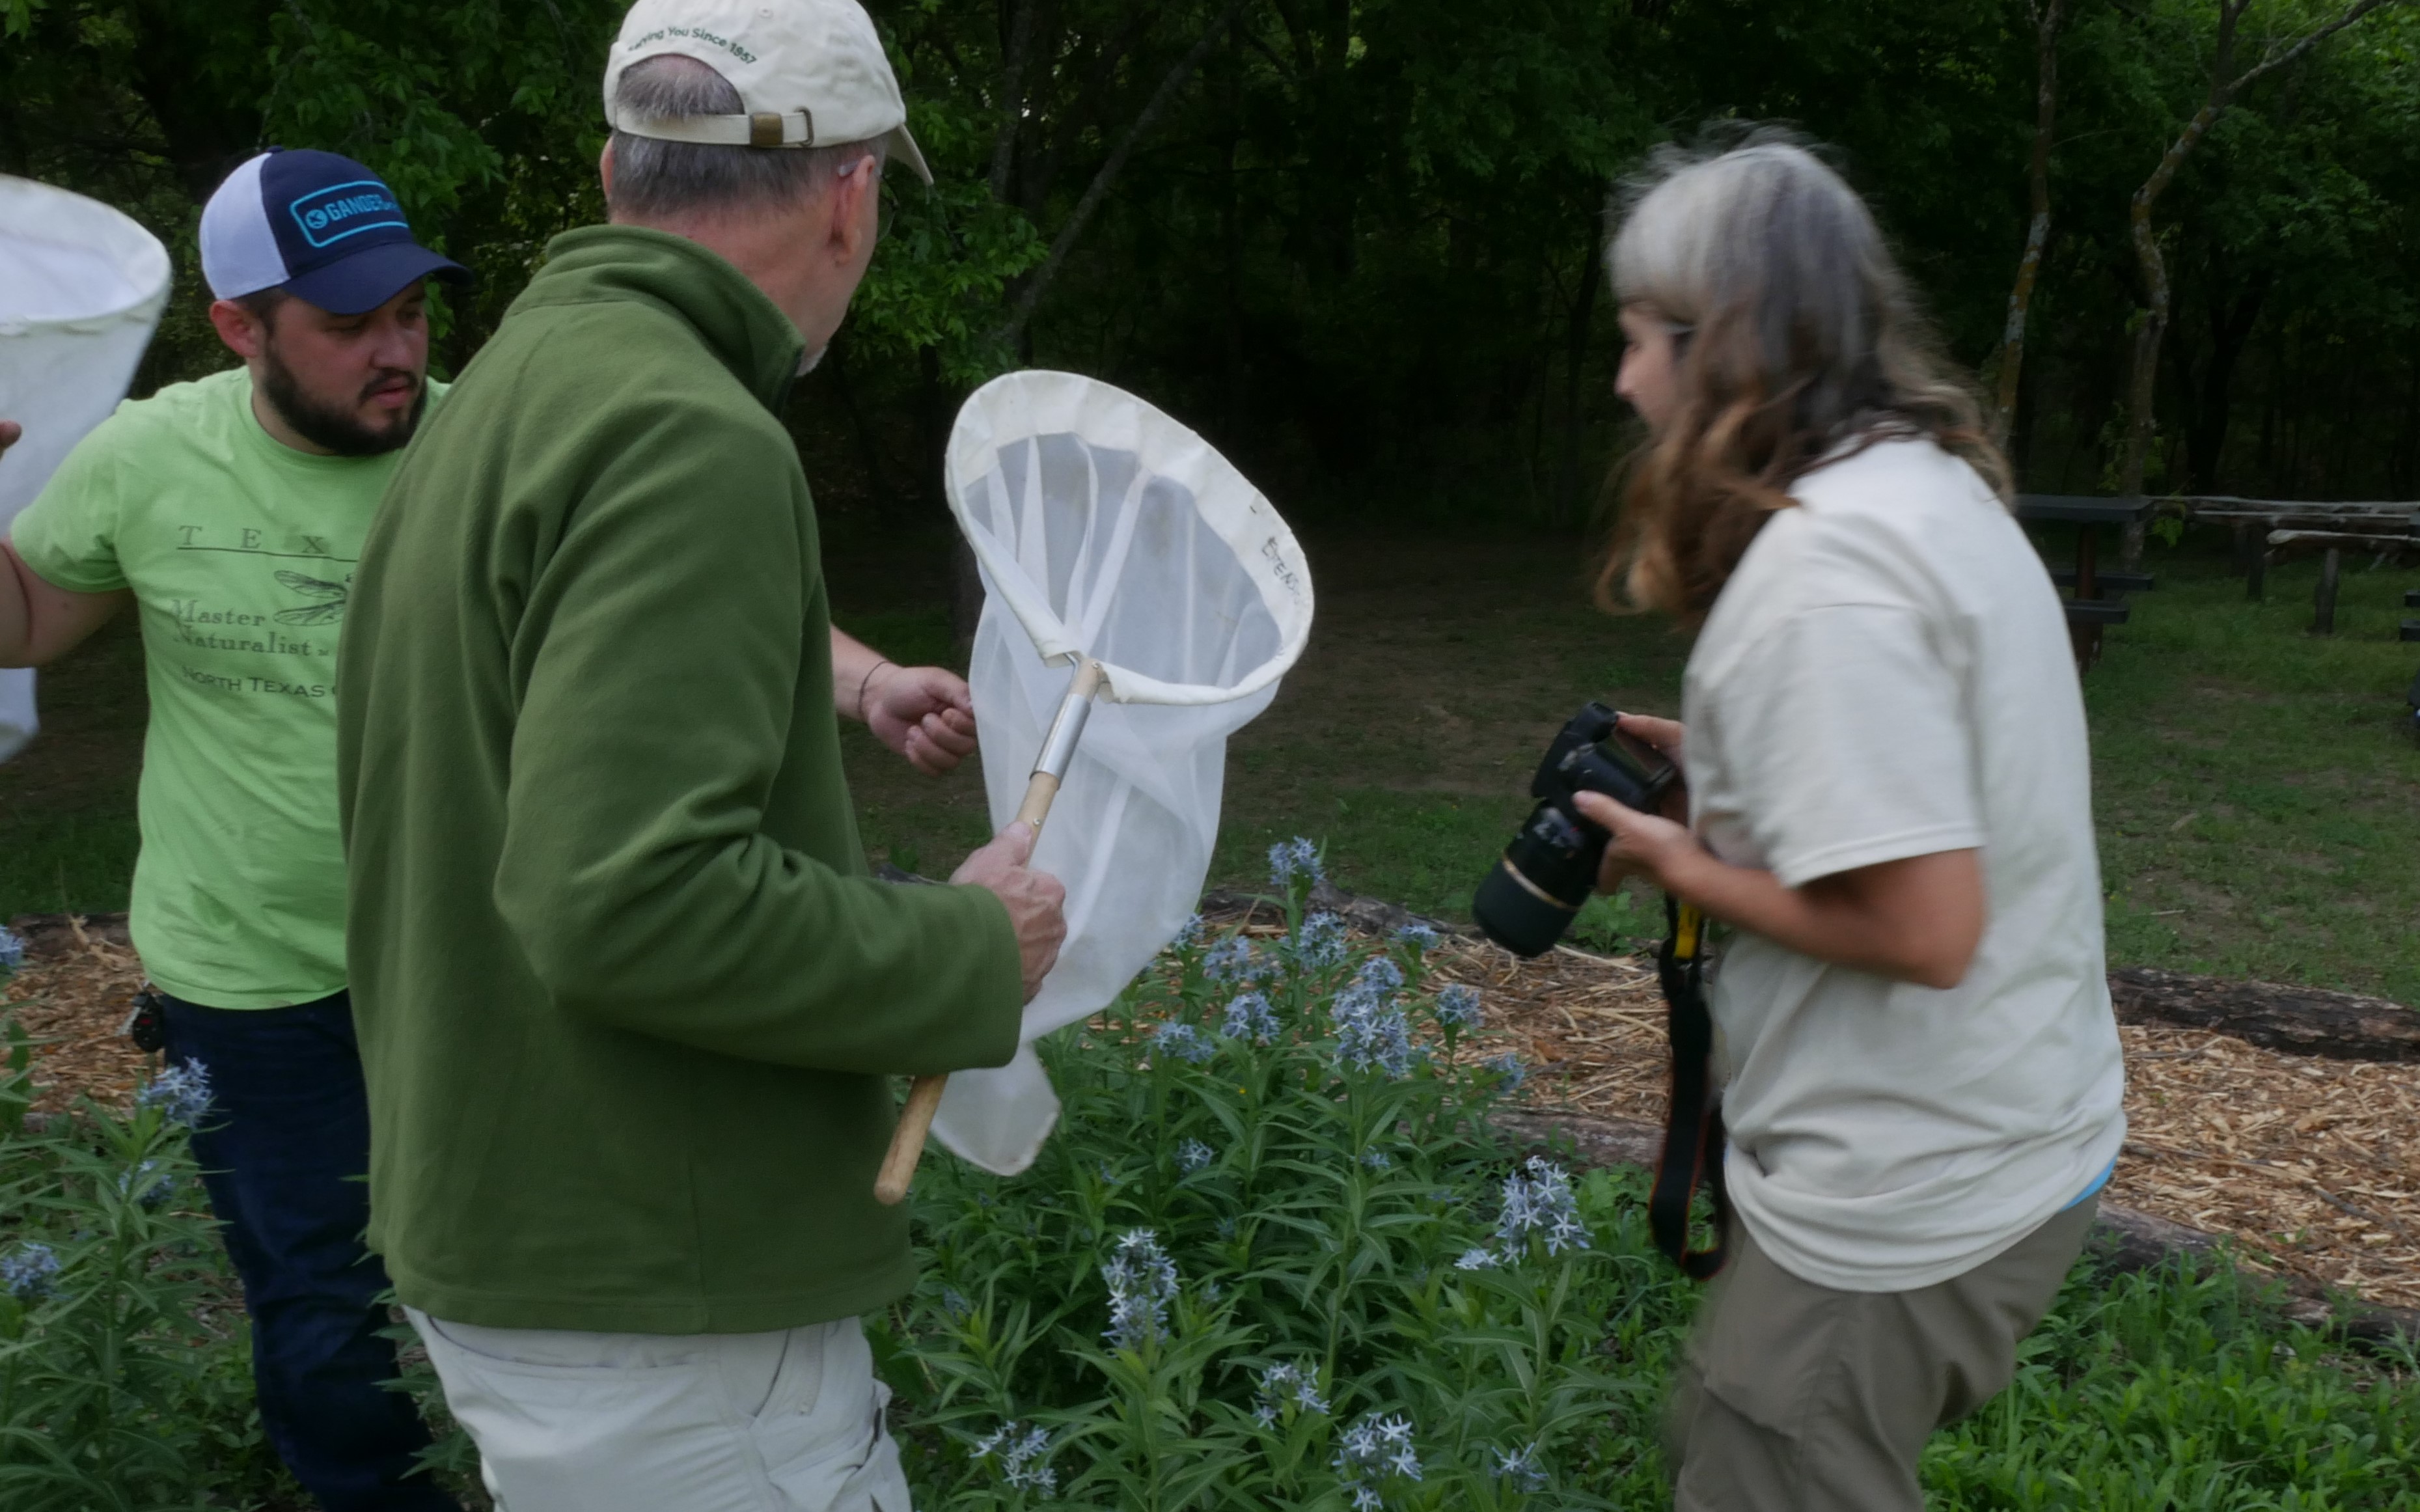 Collecting insects during the Bioblitz survey in Lewisville, TX.